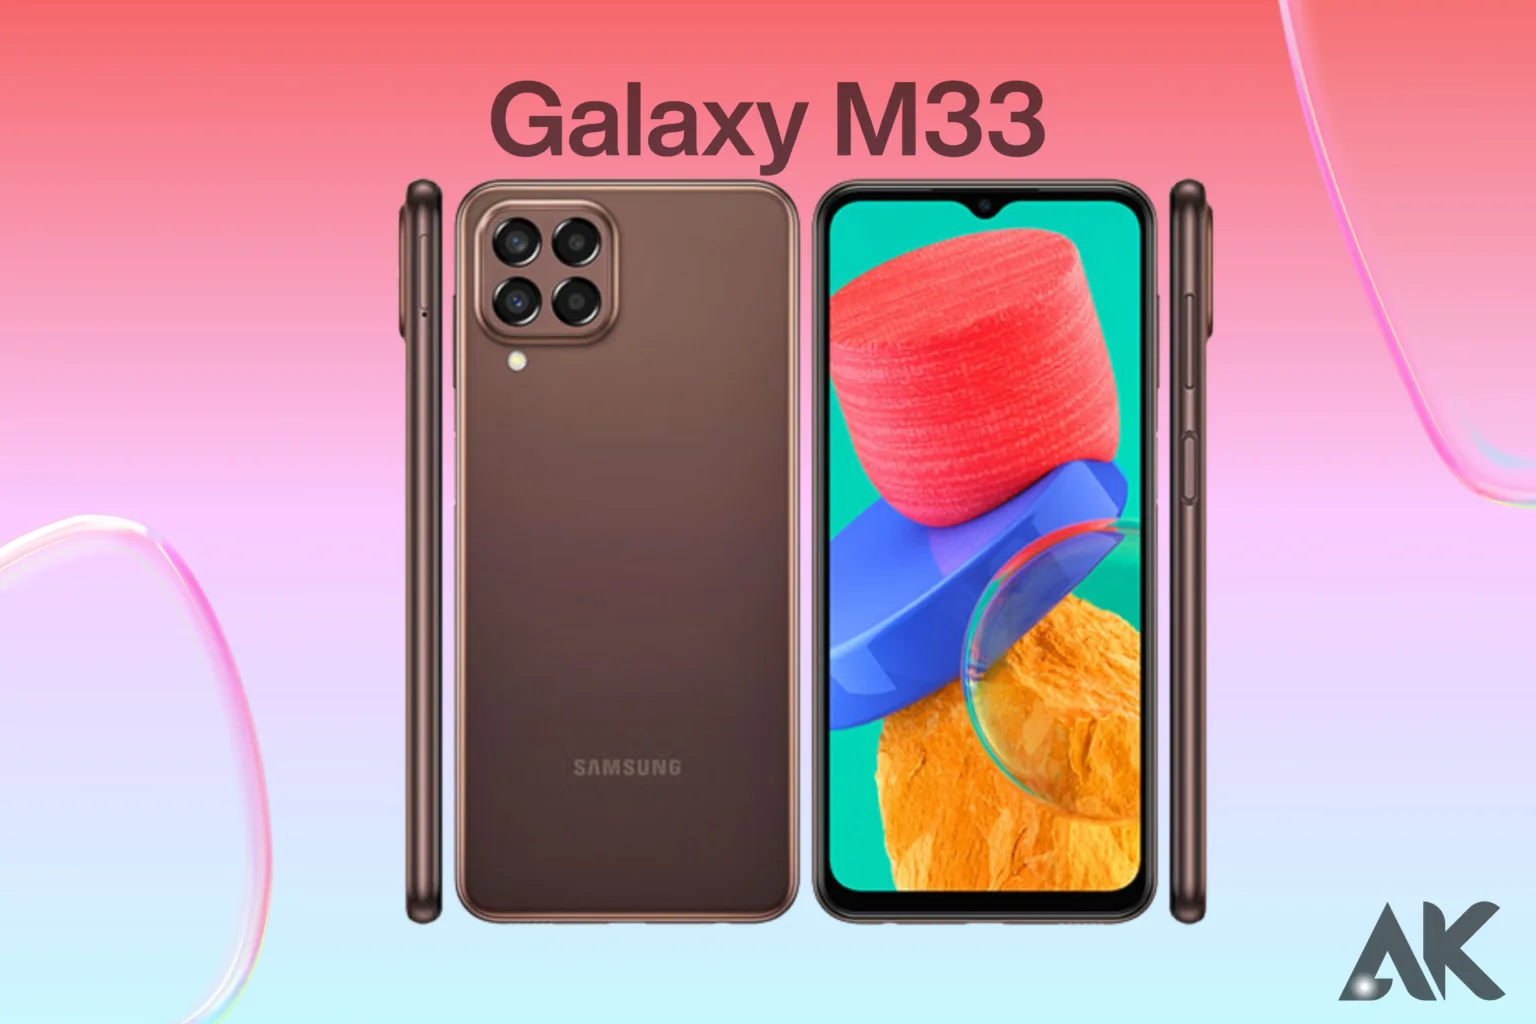 Galaxy M33 features